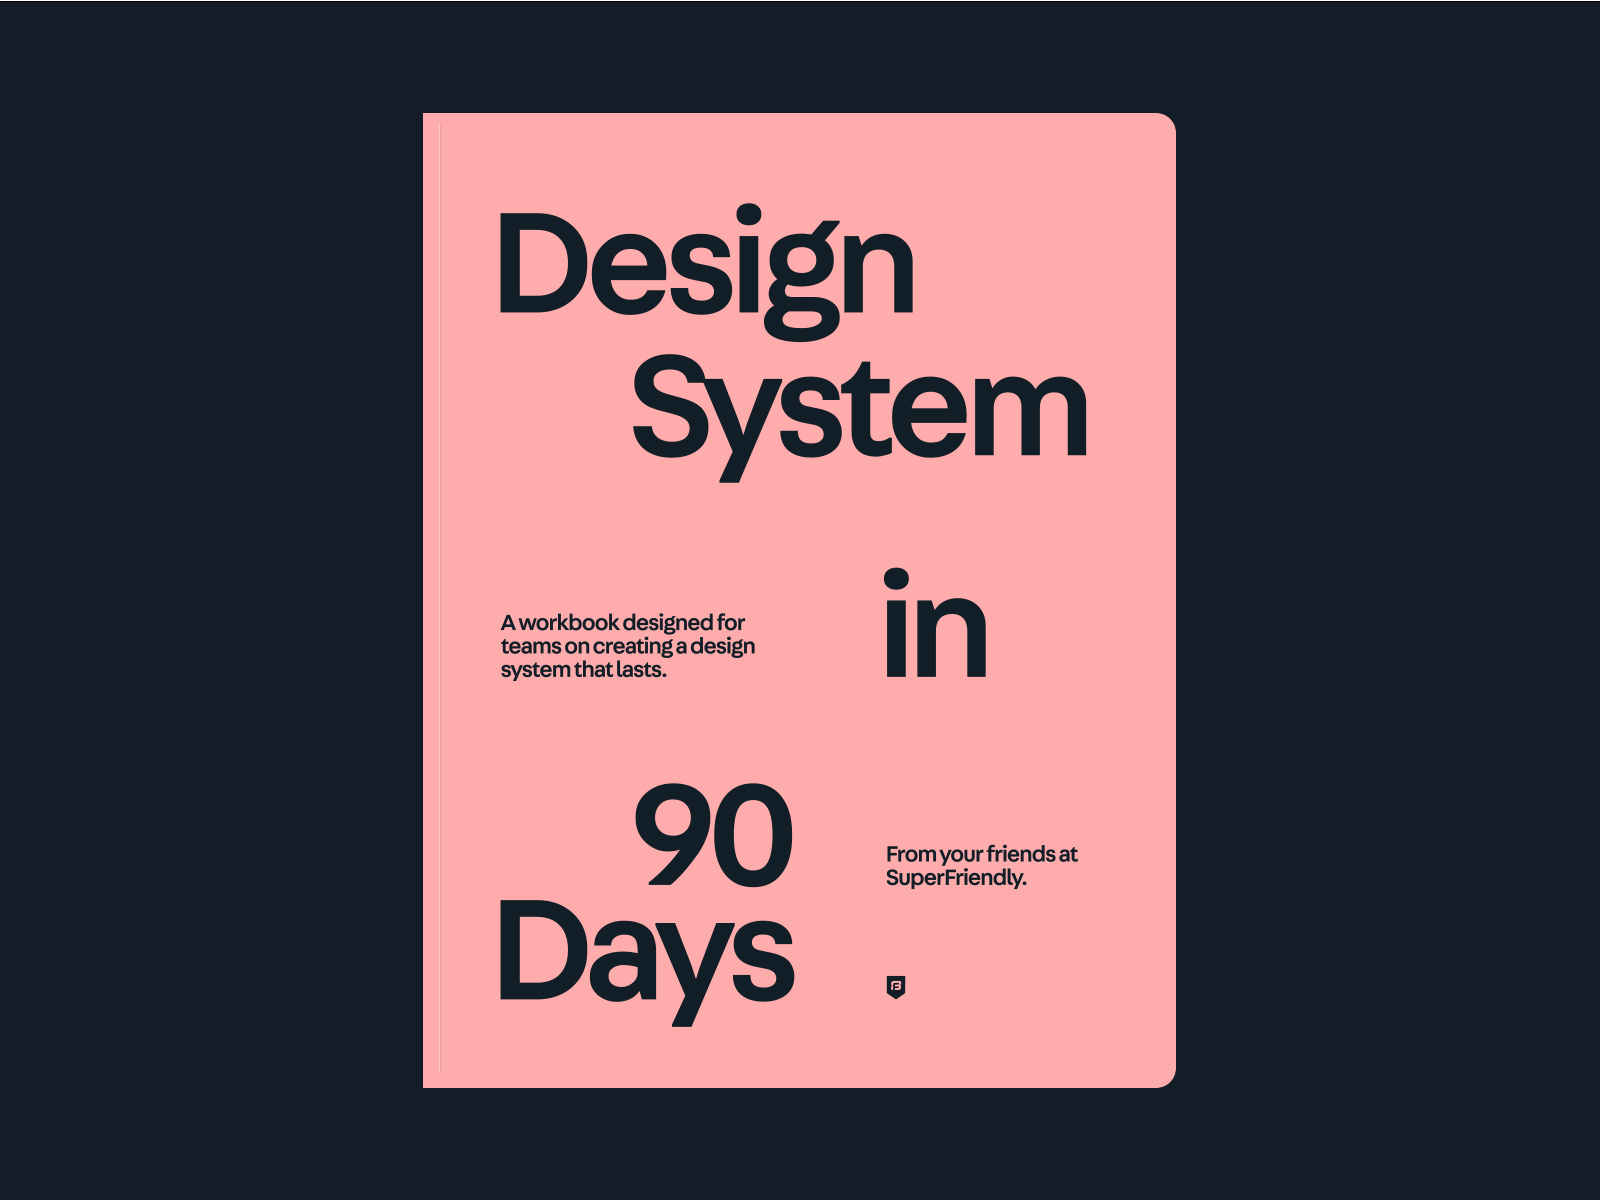 Design System in 90 Days by Dan Mall